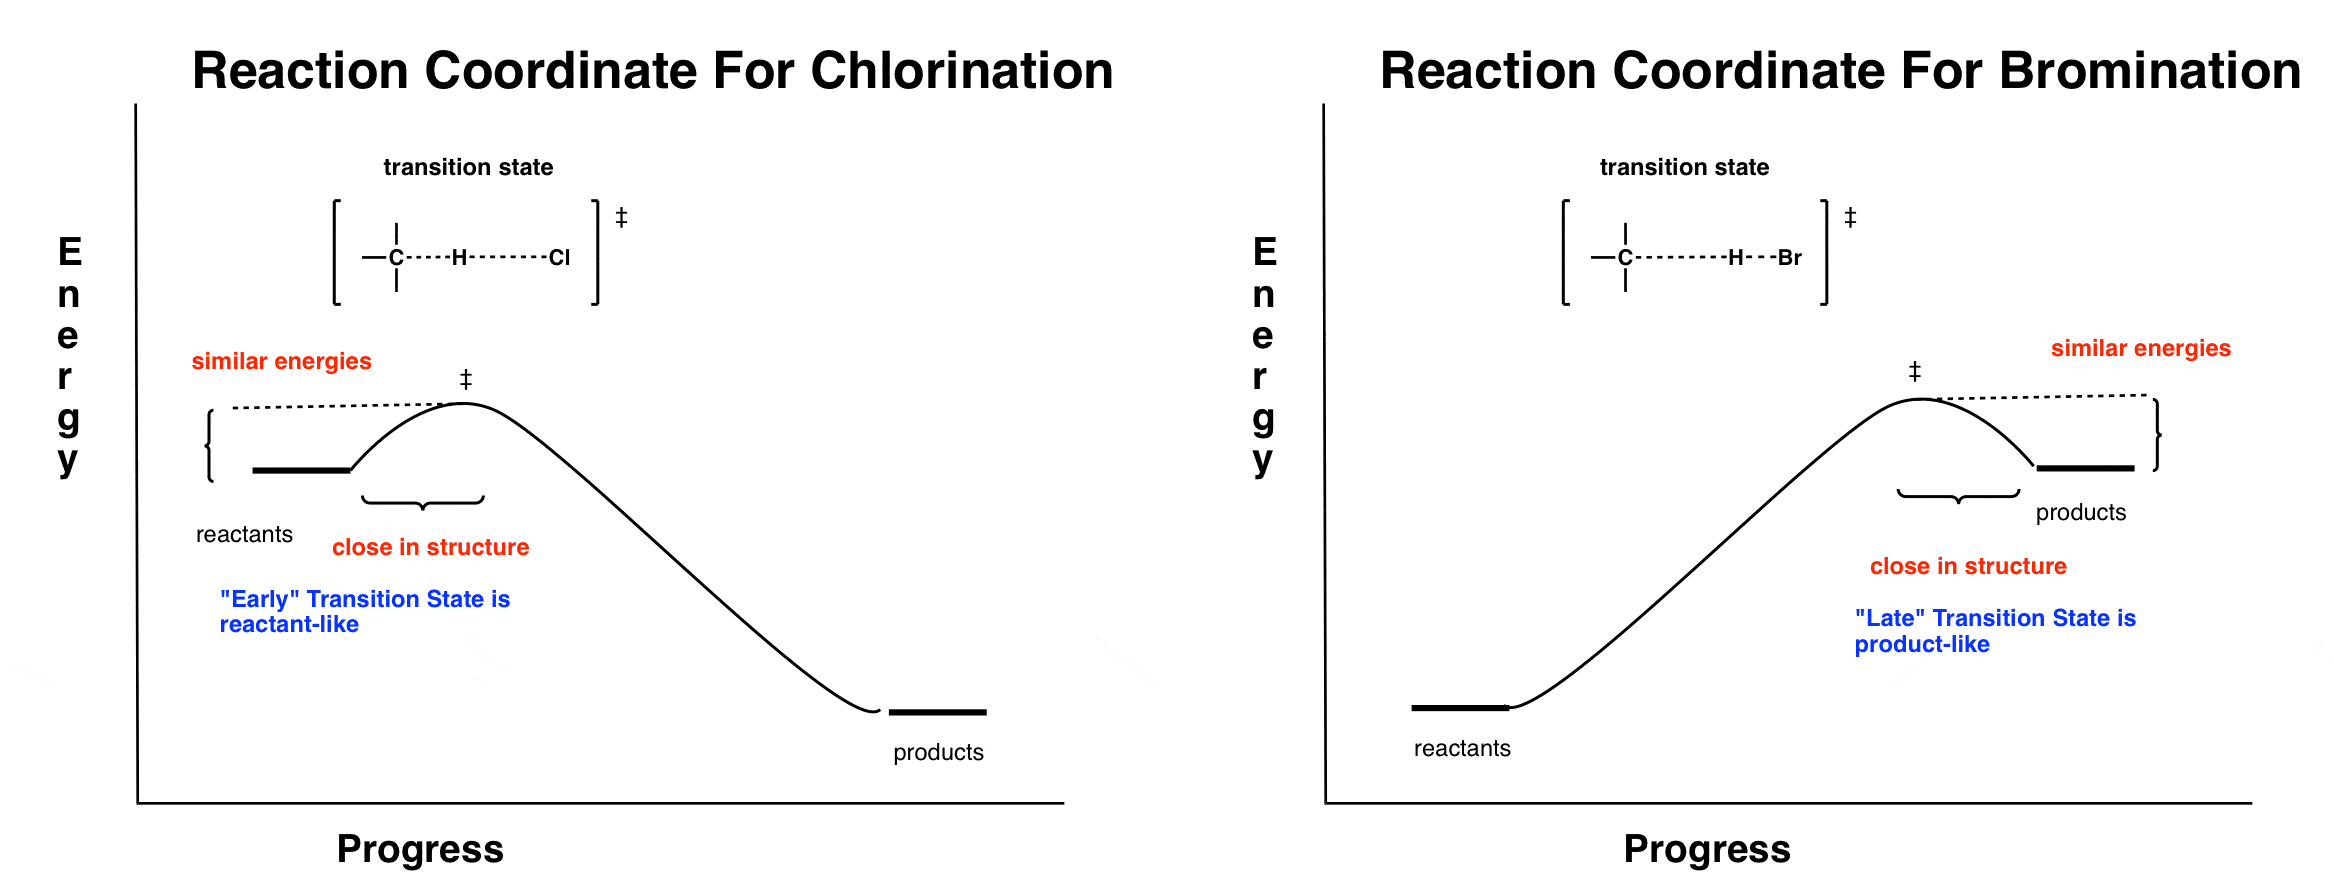 reaction-coordinate-for-chlorination-versus-reaction-coordinate-for-bromination-early-versus-late-transition-states